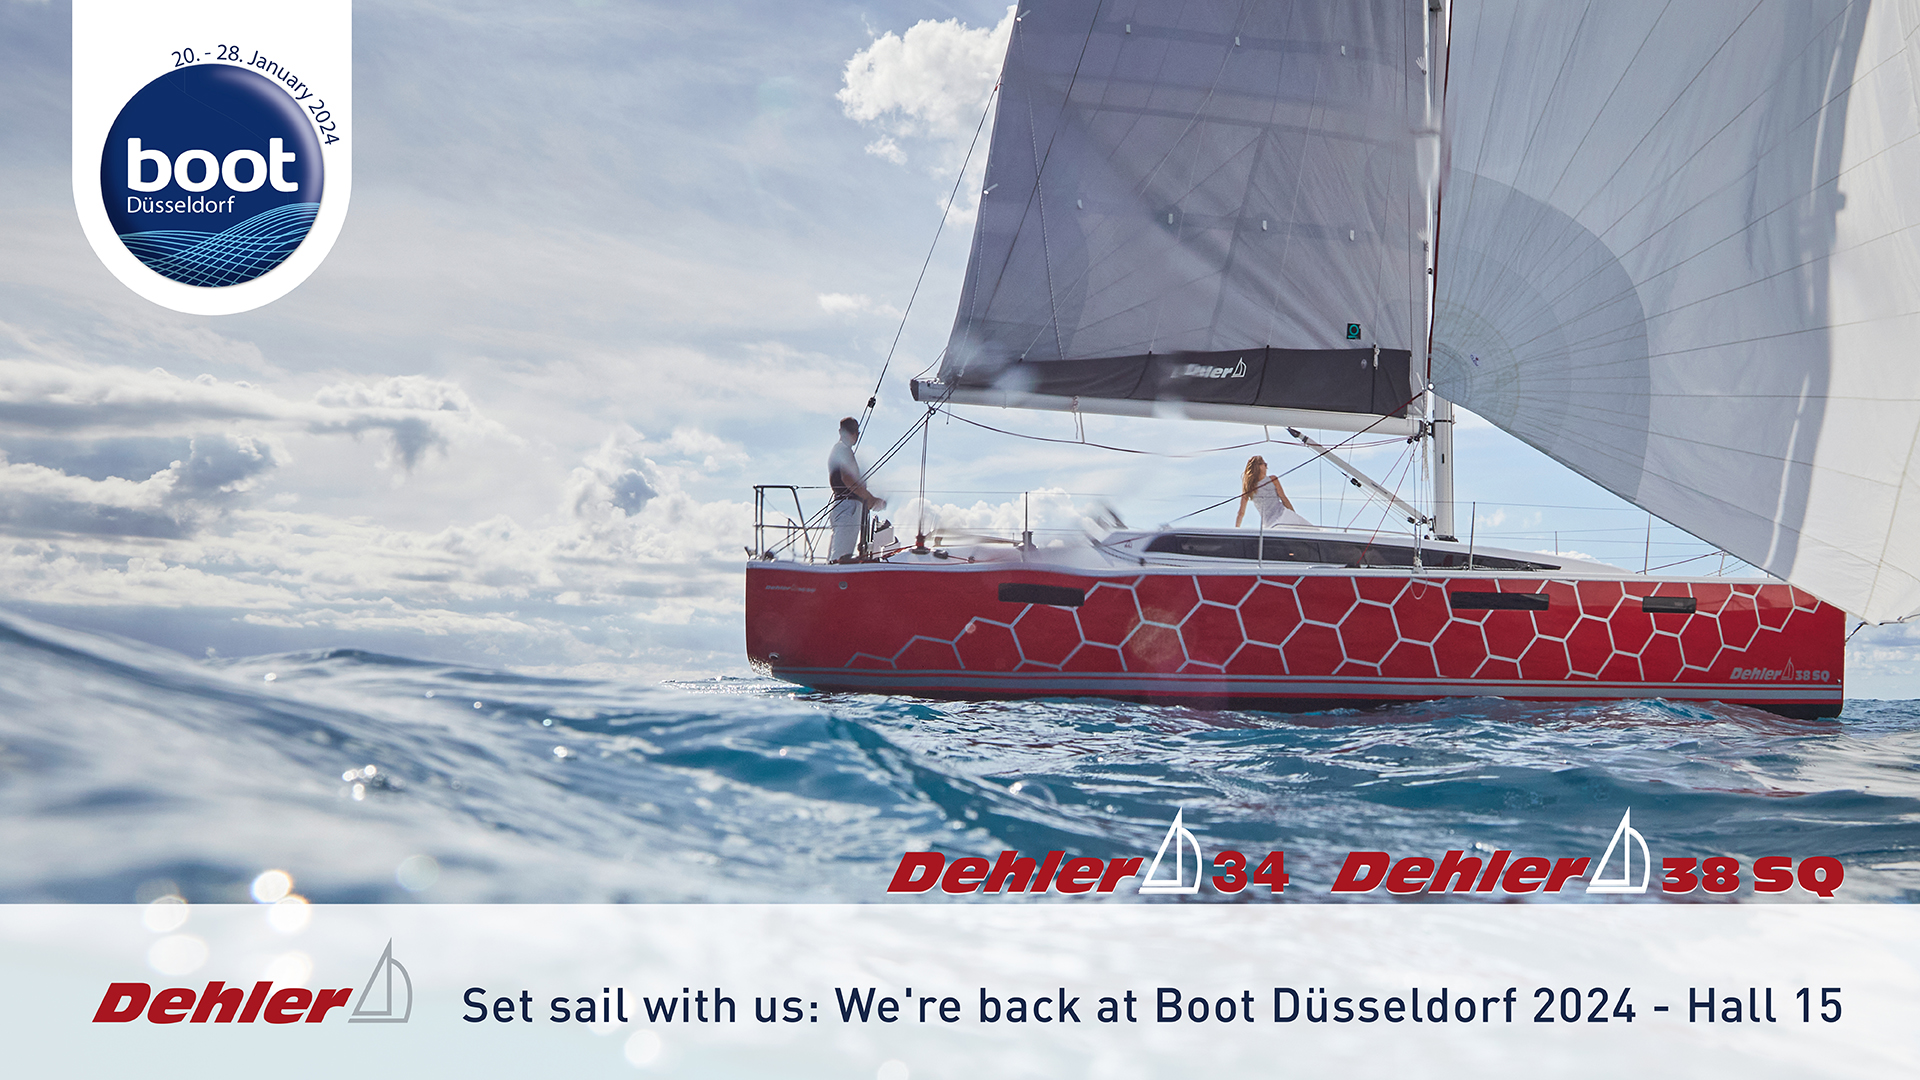 Set sail with us: We're back at boot Düsseldorf 2024 - Hall 15